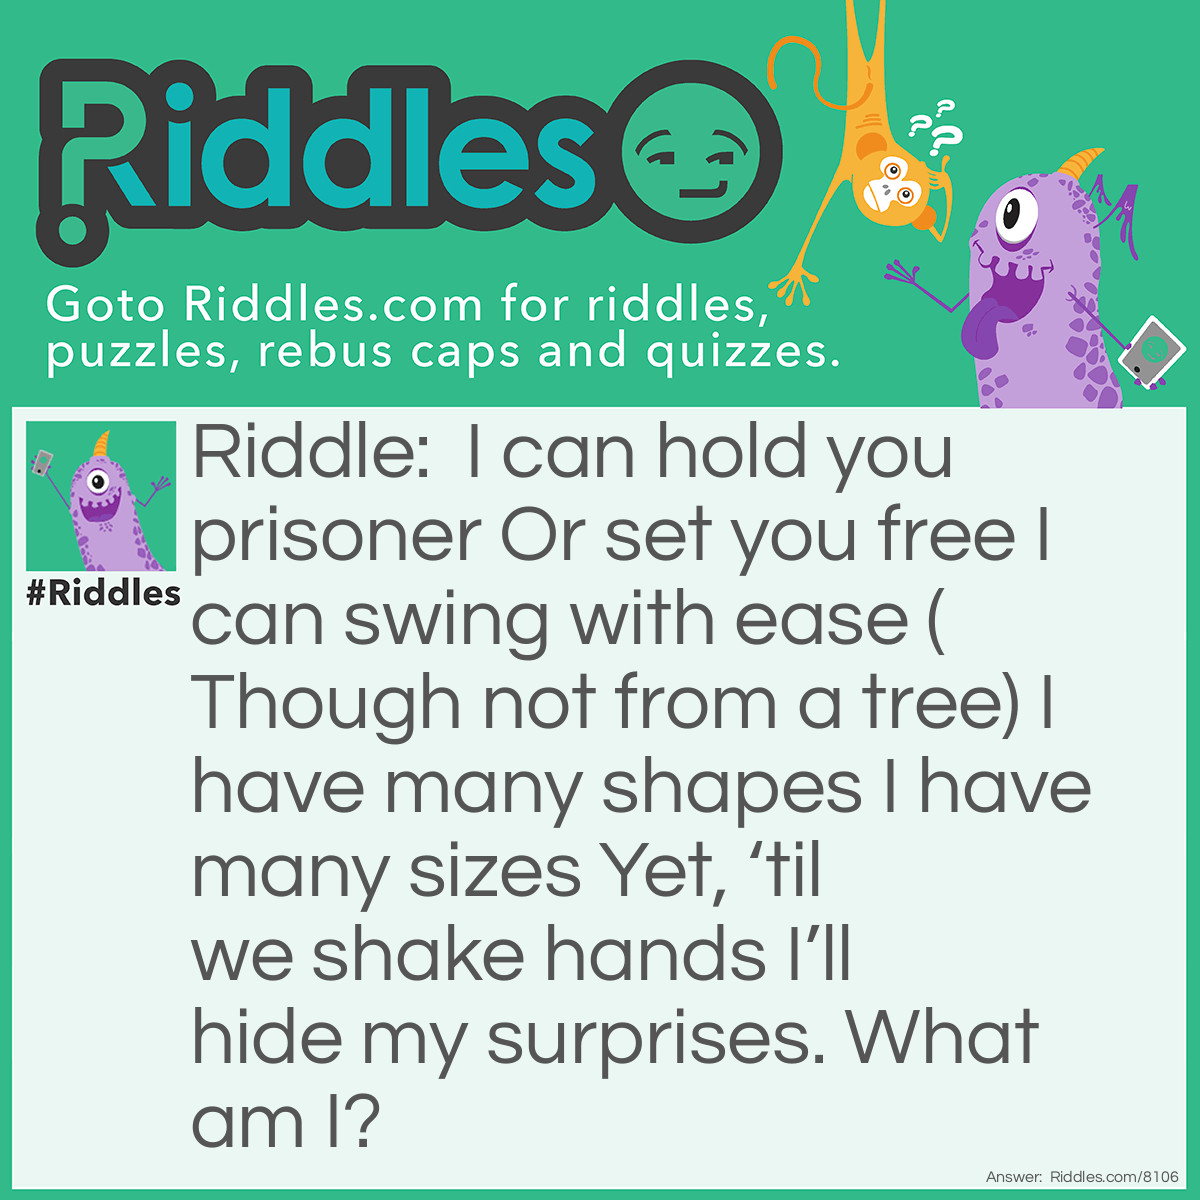 Riddle: I can hold you prisoner Or set you free I can swing with ease (Though not from a tree) I have many shapes I have many sizes Yet, 'til we shake hands I'll hide my surprises. What am I? Answer: A door.